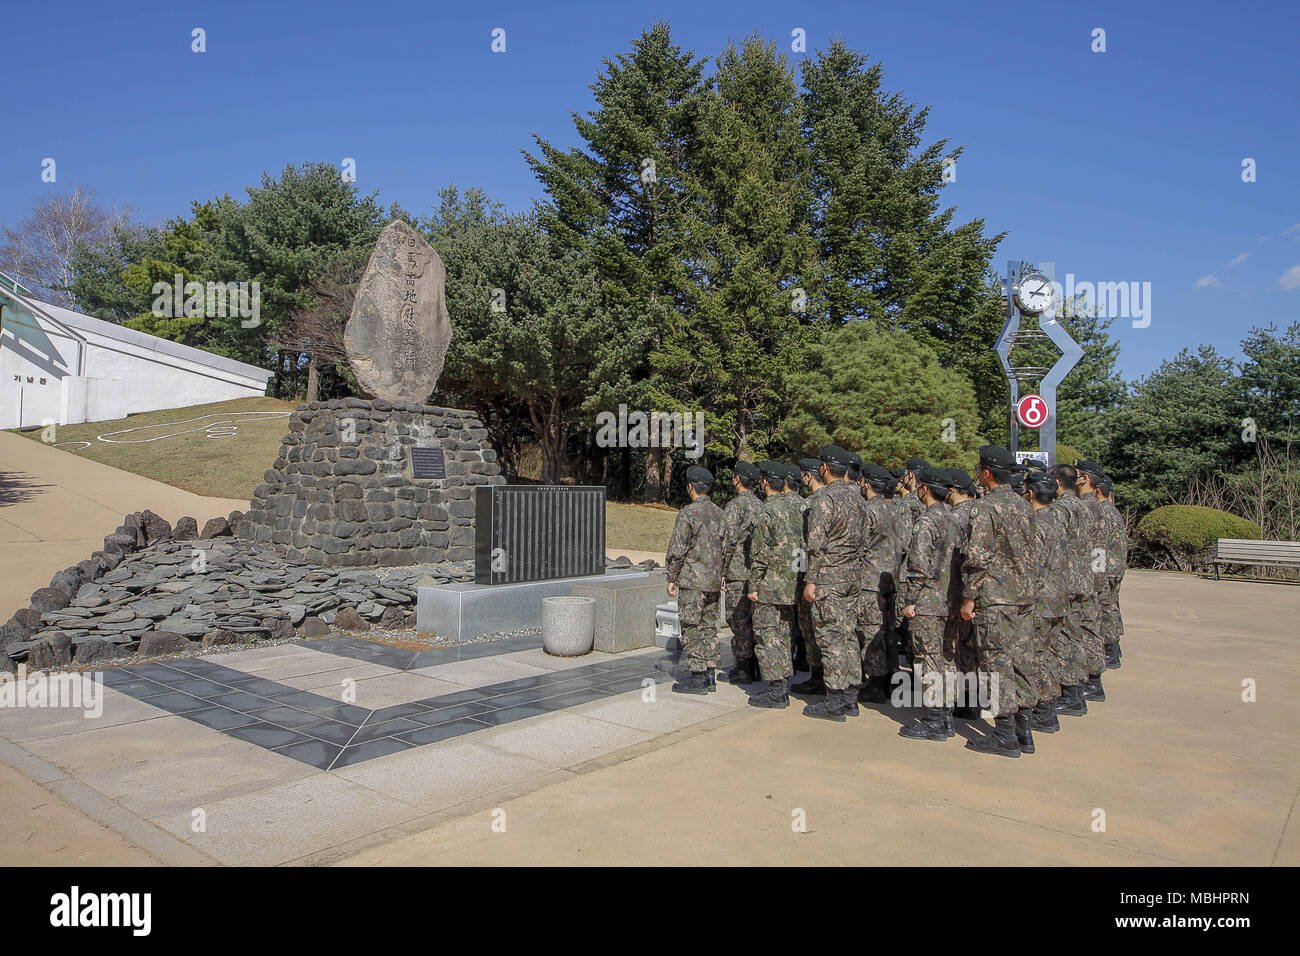 Cheorwon, GANGWON, SOUTH KOREA. 11th Apr, 2018. April 11, 2018-Goyang, South Korea-South Korean Army soldiers visit battle of white horse memorial monument in Cheorwon, South Korea. The Battle of White Horse was another in a series of bloody battles for dominant hilltop positions during the Korean War. Baengma-goji was a 395-metre (1,296 ft) hill in the Iron Triangle, formed by Pyonggang at its peak and Gimhwa-eup and Cheorwon at its base, was a strategic transportation route in the central region of the Korean peninsula. White Horse was the crest of a forested hill mass that extended in a n Stock Photo